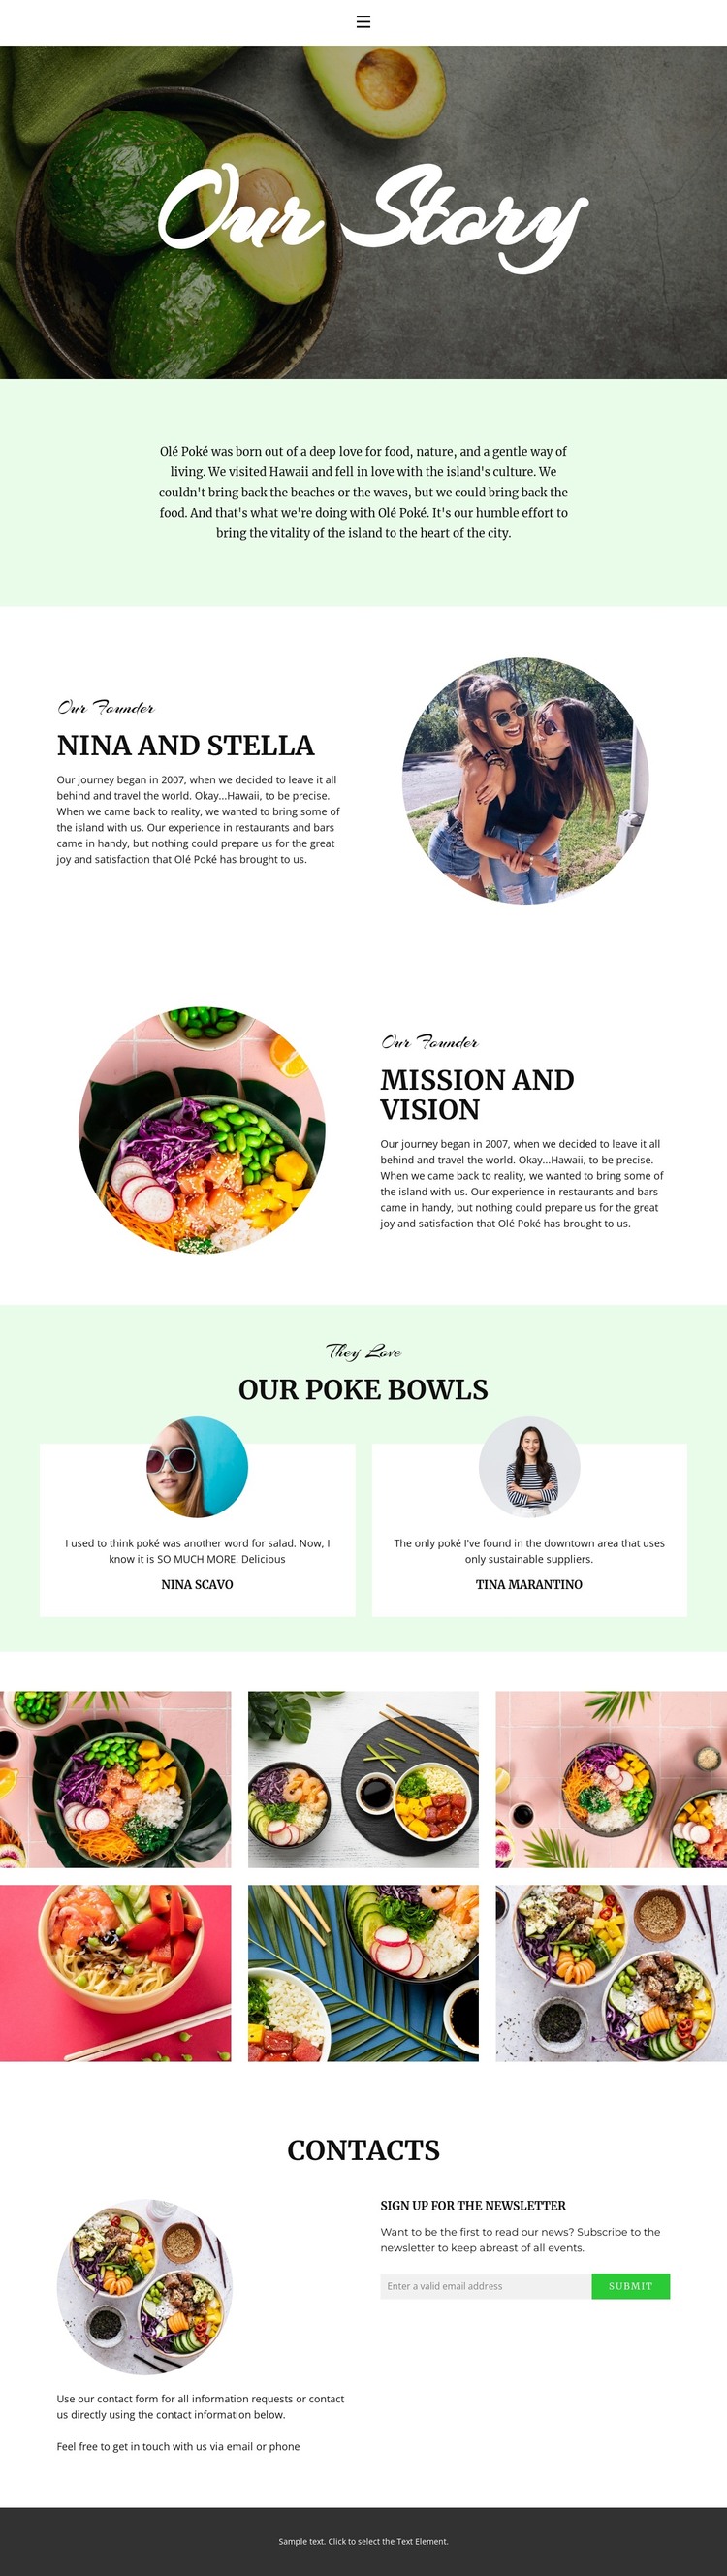 About our founder WordPress Theme